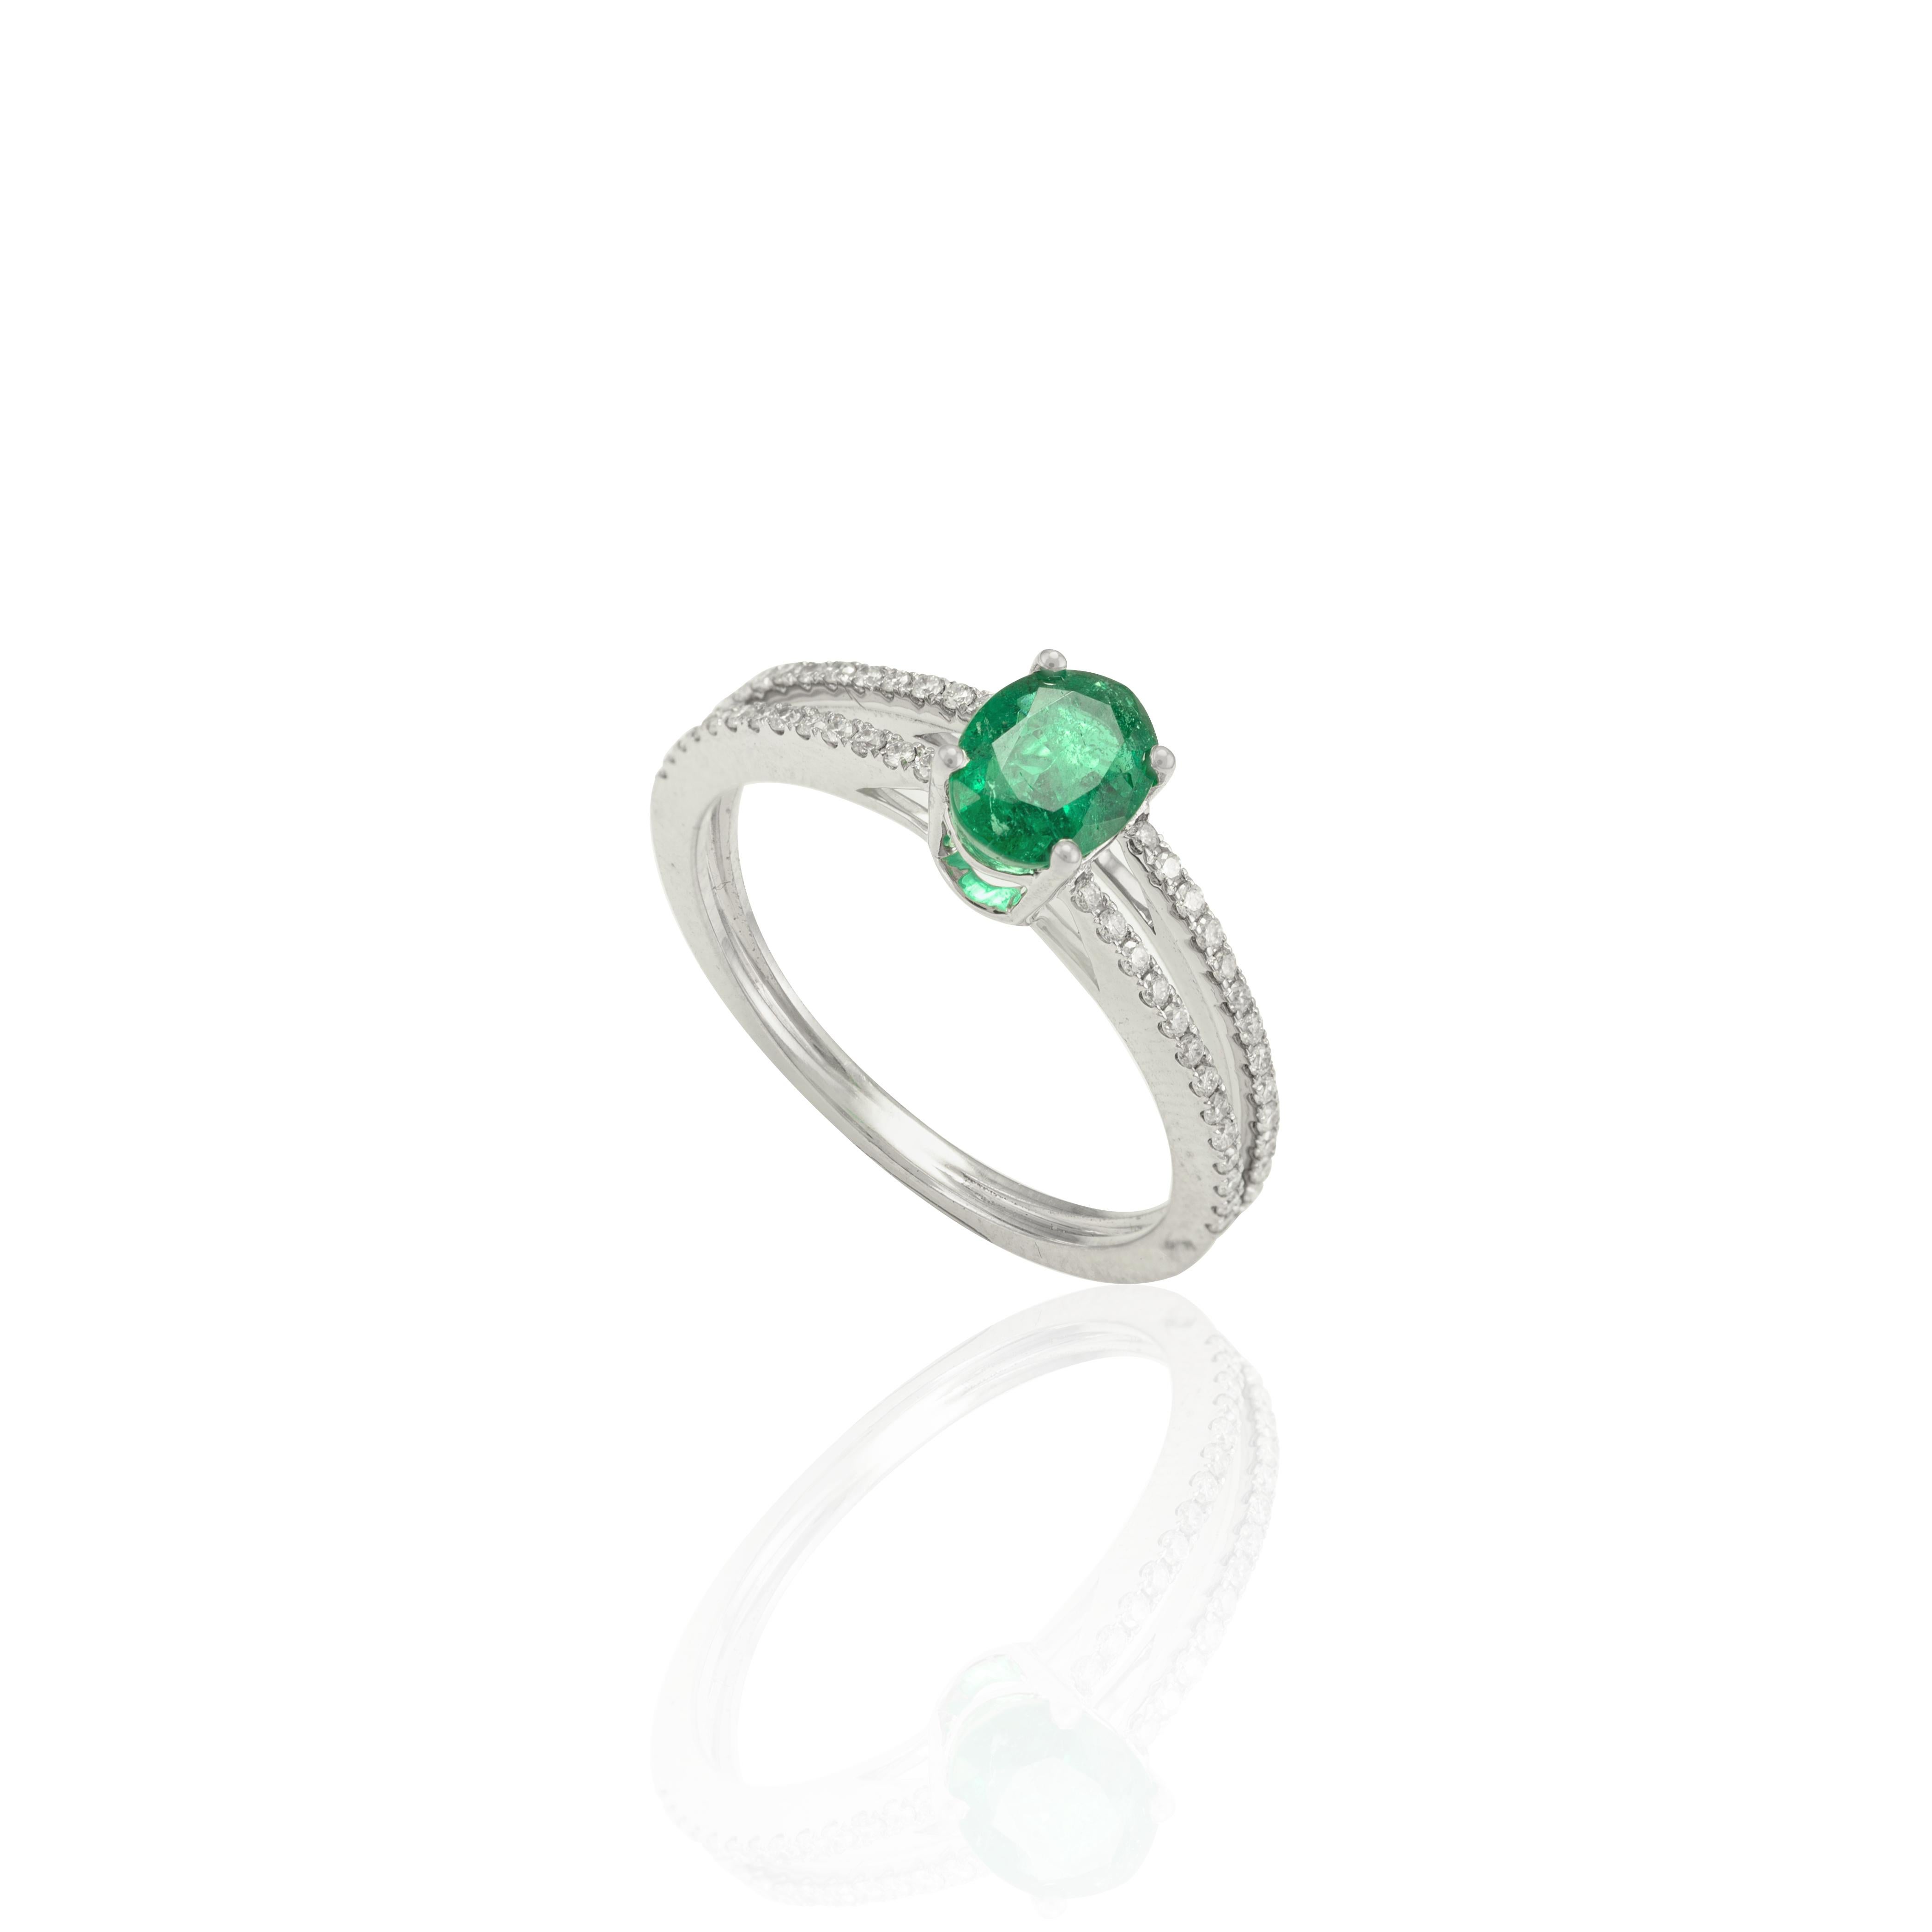 For Sale:  Genuine Oval Cut Emerald and Diamond Ring in Solid 18k White Gold 4